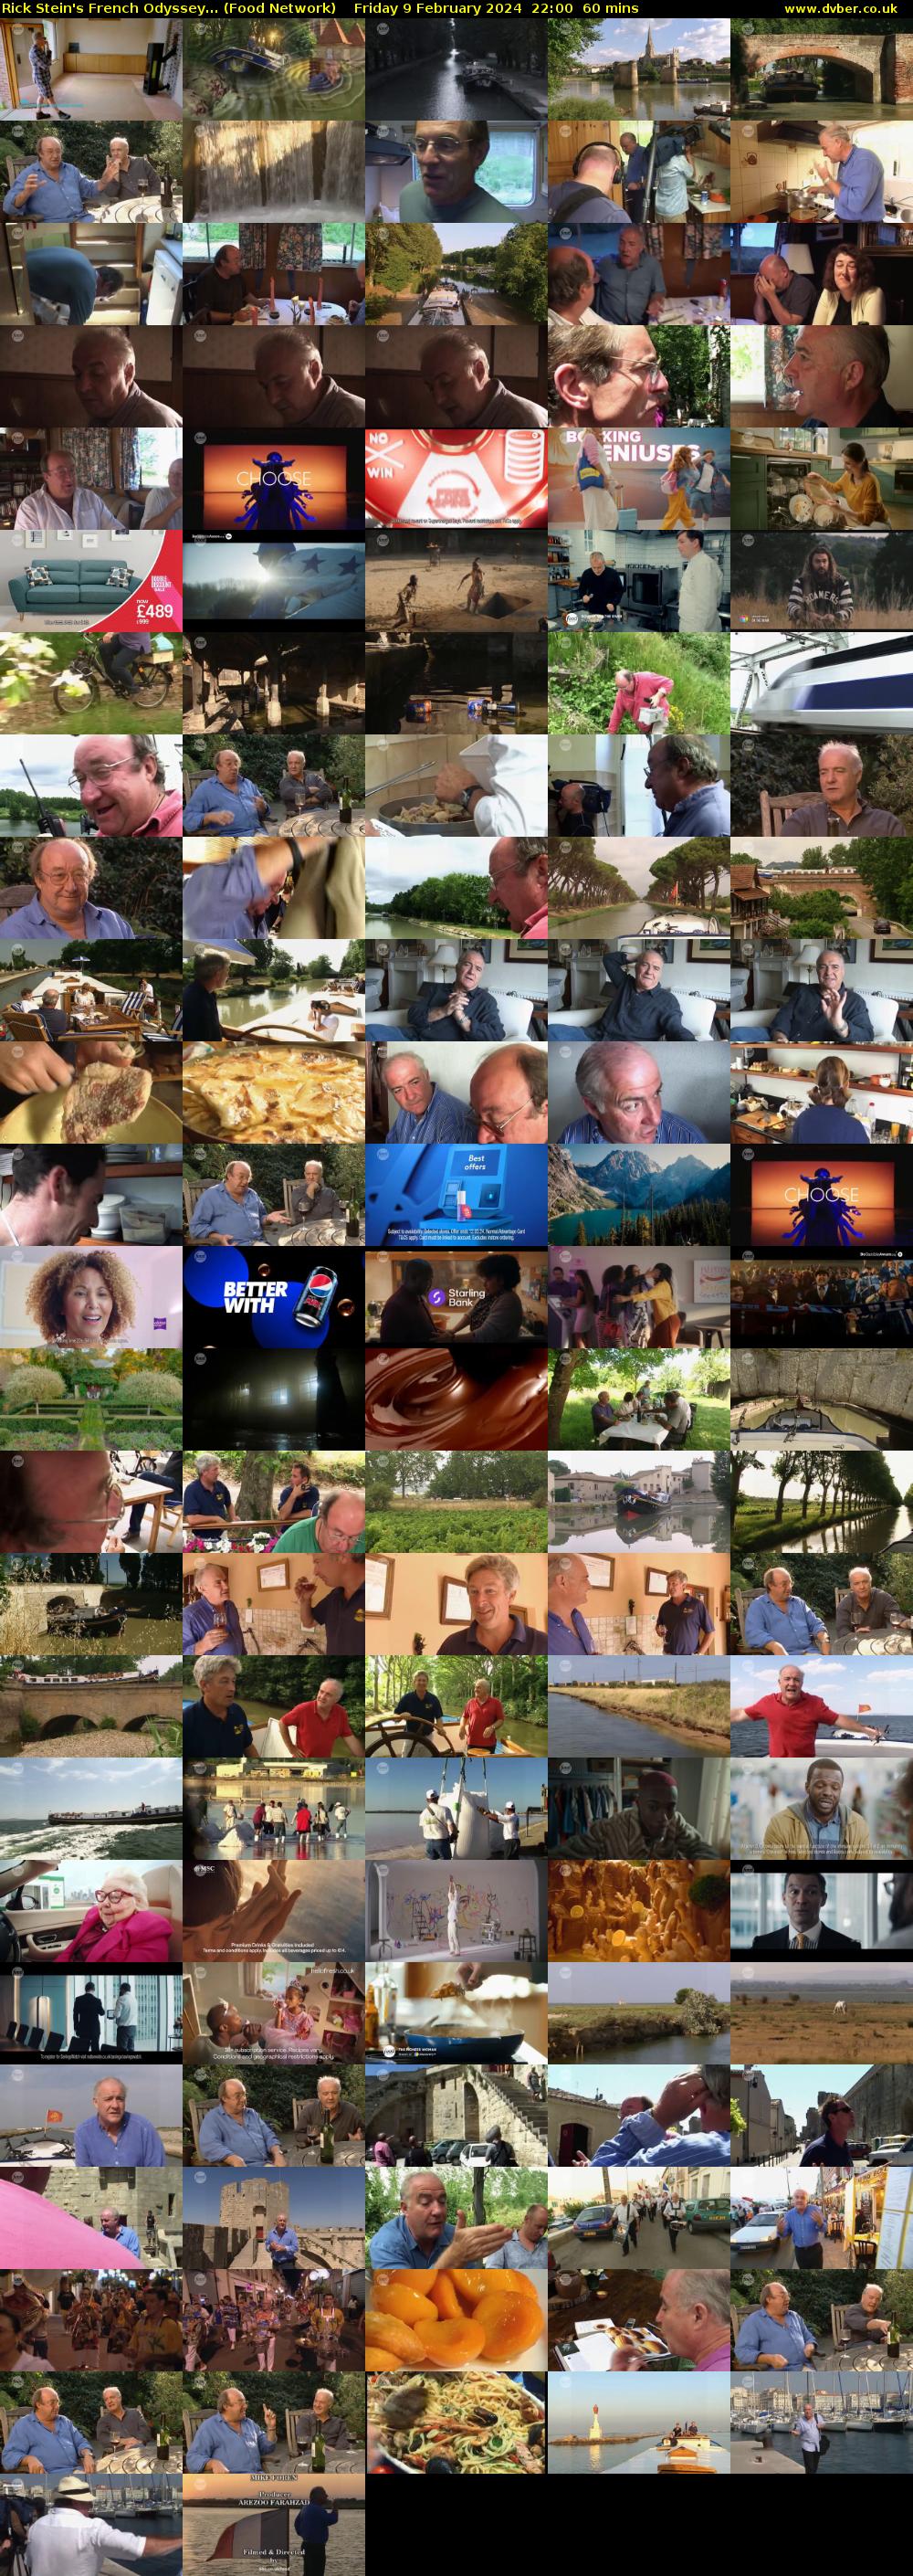 Rick Stein's French Odyssey... (Food Network) Friday 9 February 2024 22:00 - 23:00